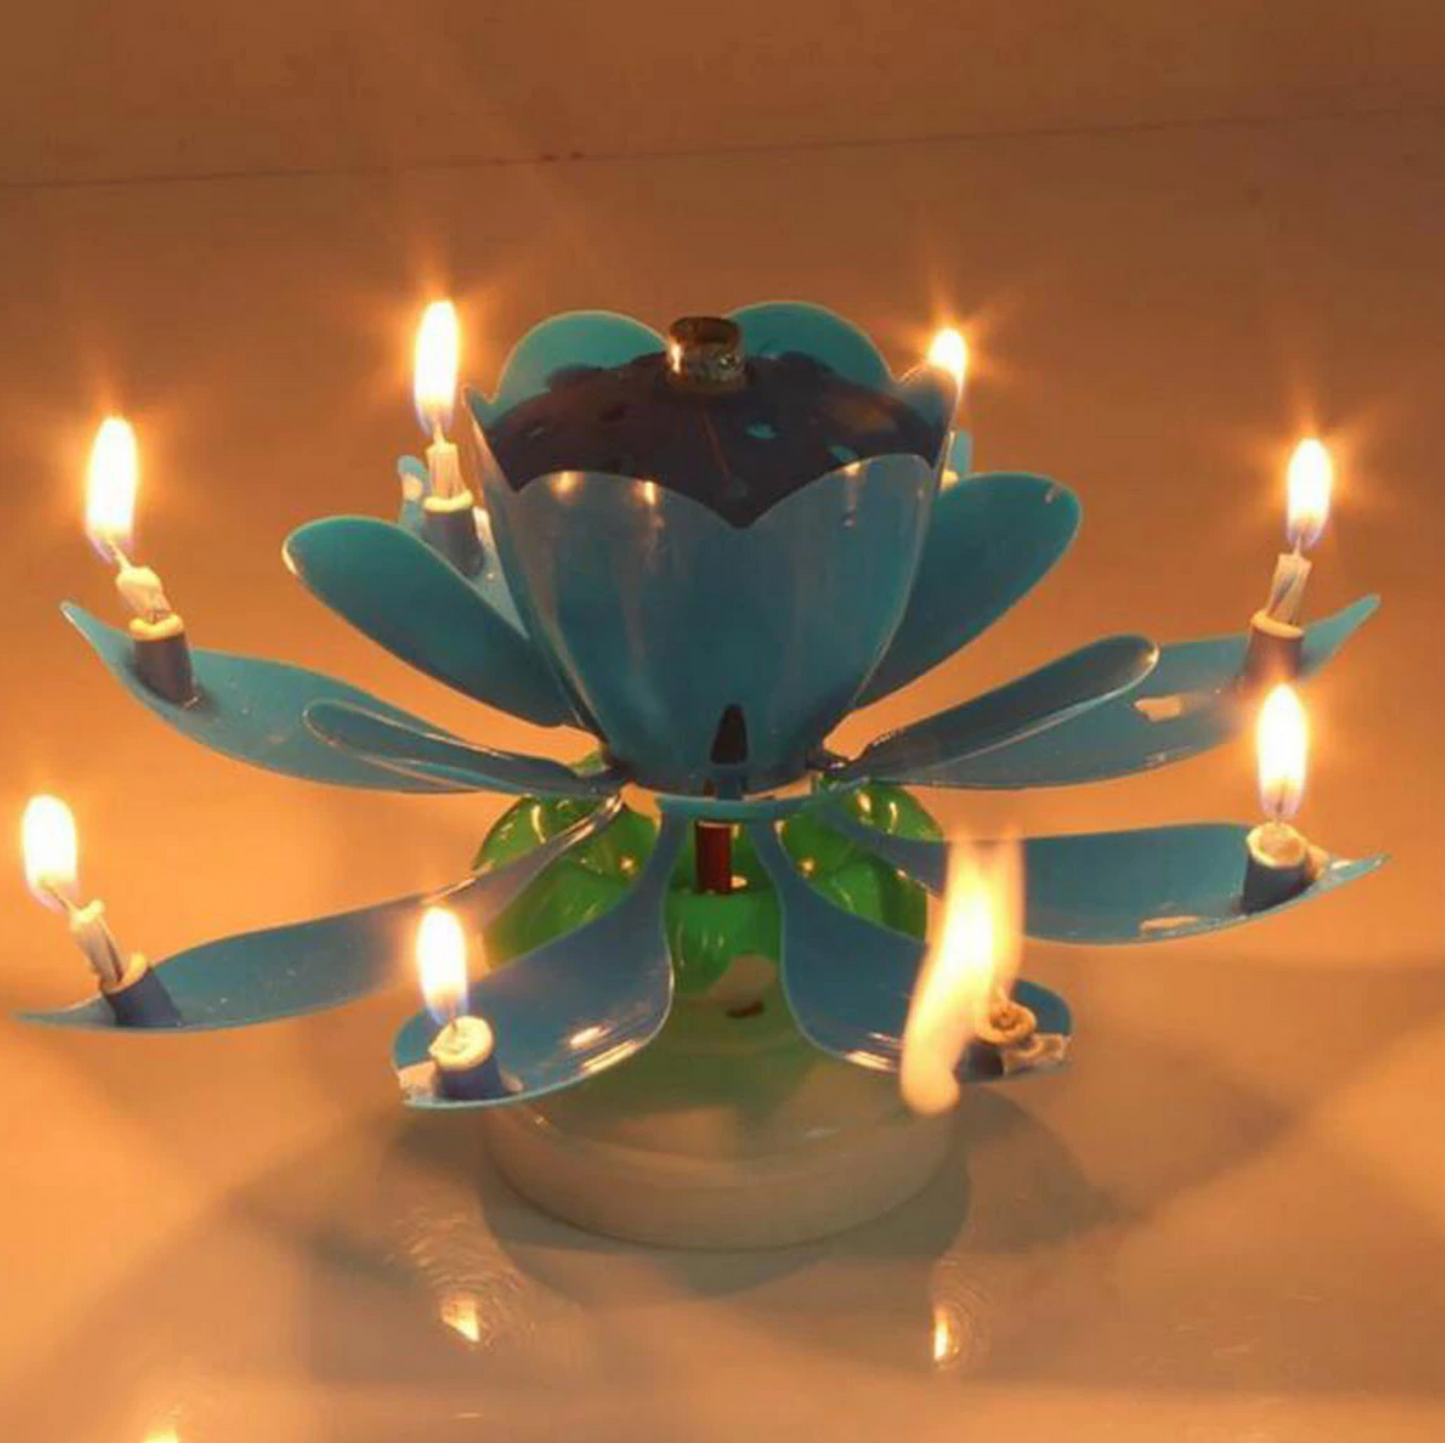 Pink Lotus Birthday Candle Musical Rotating Singing Music Happy BDay Flower Light Candles